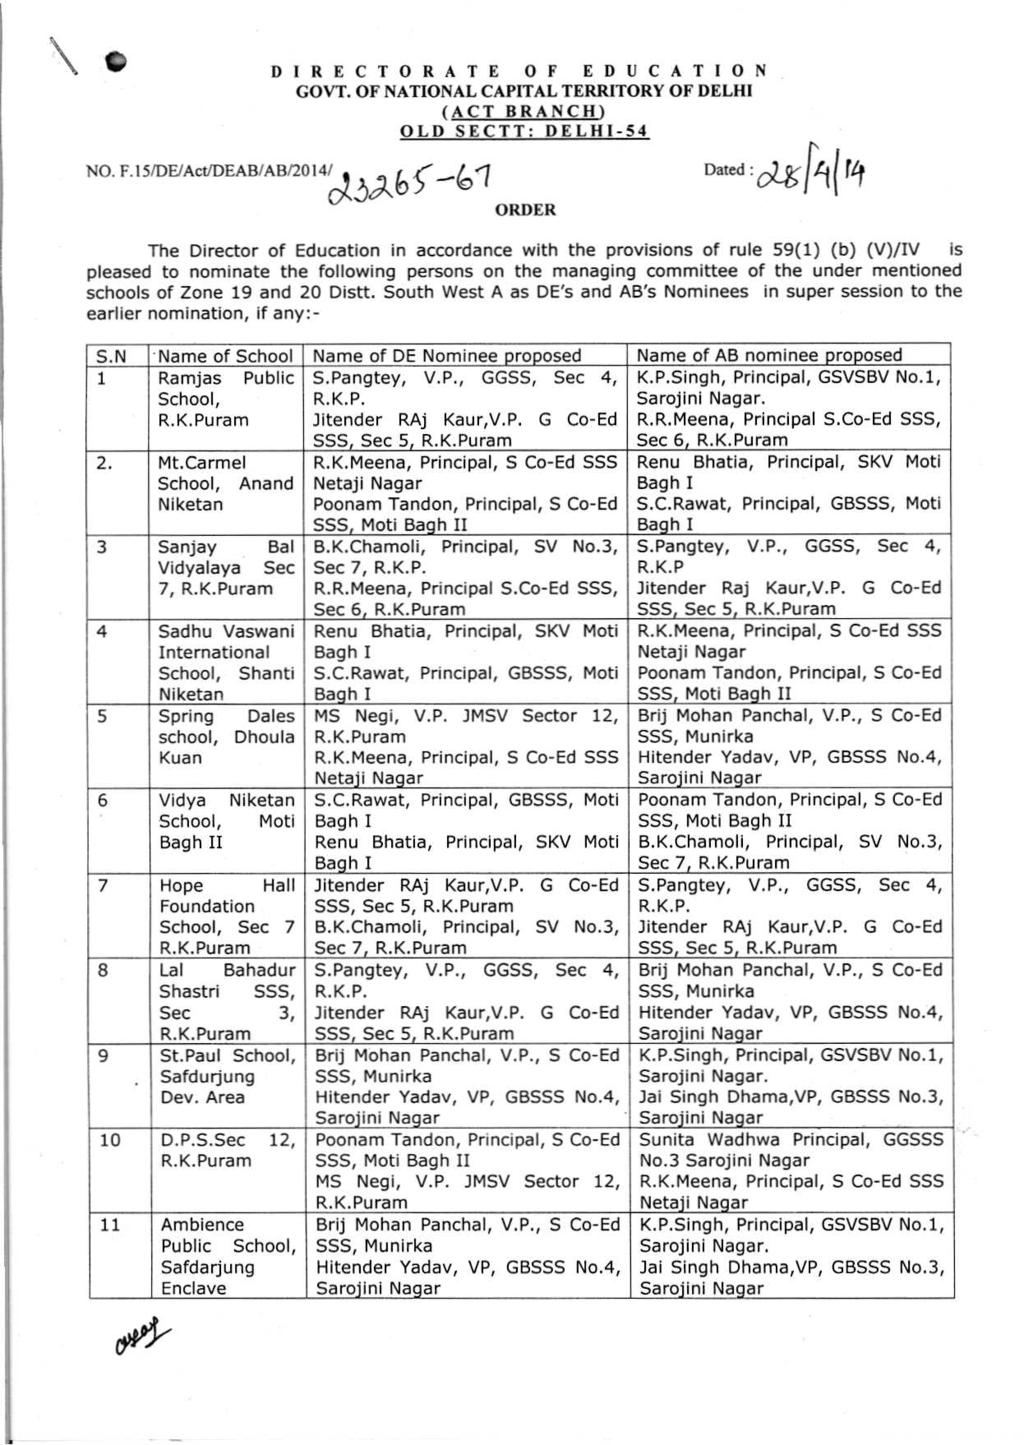 \ DIRECTORATE OF EDUCATION GOVT OF NATIONAL CAPITAL TERRITORY OF DELHI (ACT BRANCH) OLD SEcrT: DELHI-54 NO F I5IDElA,tlDEAB/ABI20 14Jj J-b 5'-C:,1 ORDER The Director of Education in accordance with